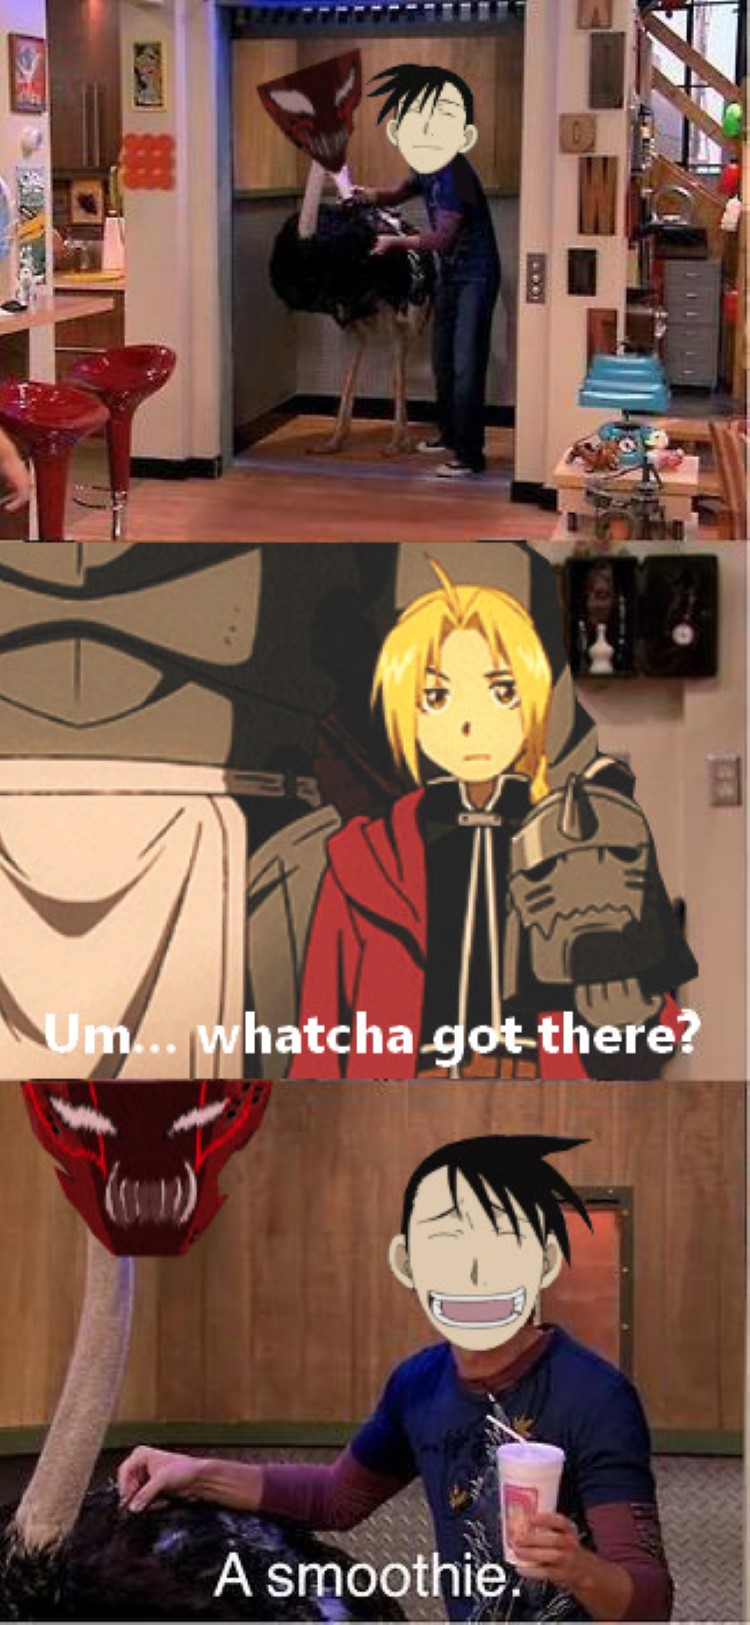 Whachyu got there? A smoothe - iCarly FMA crossover